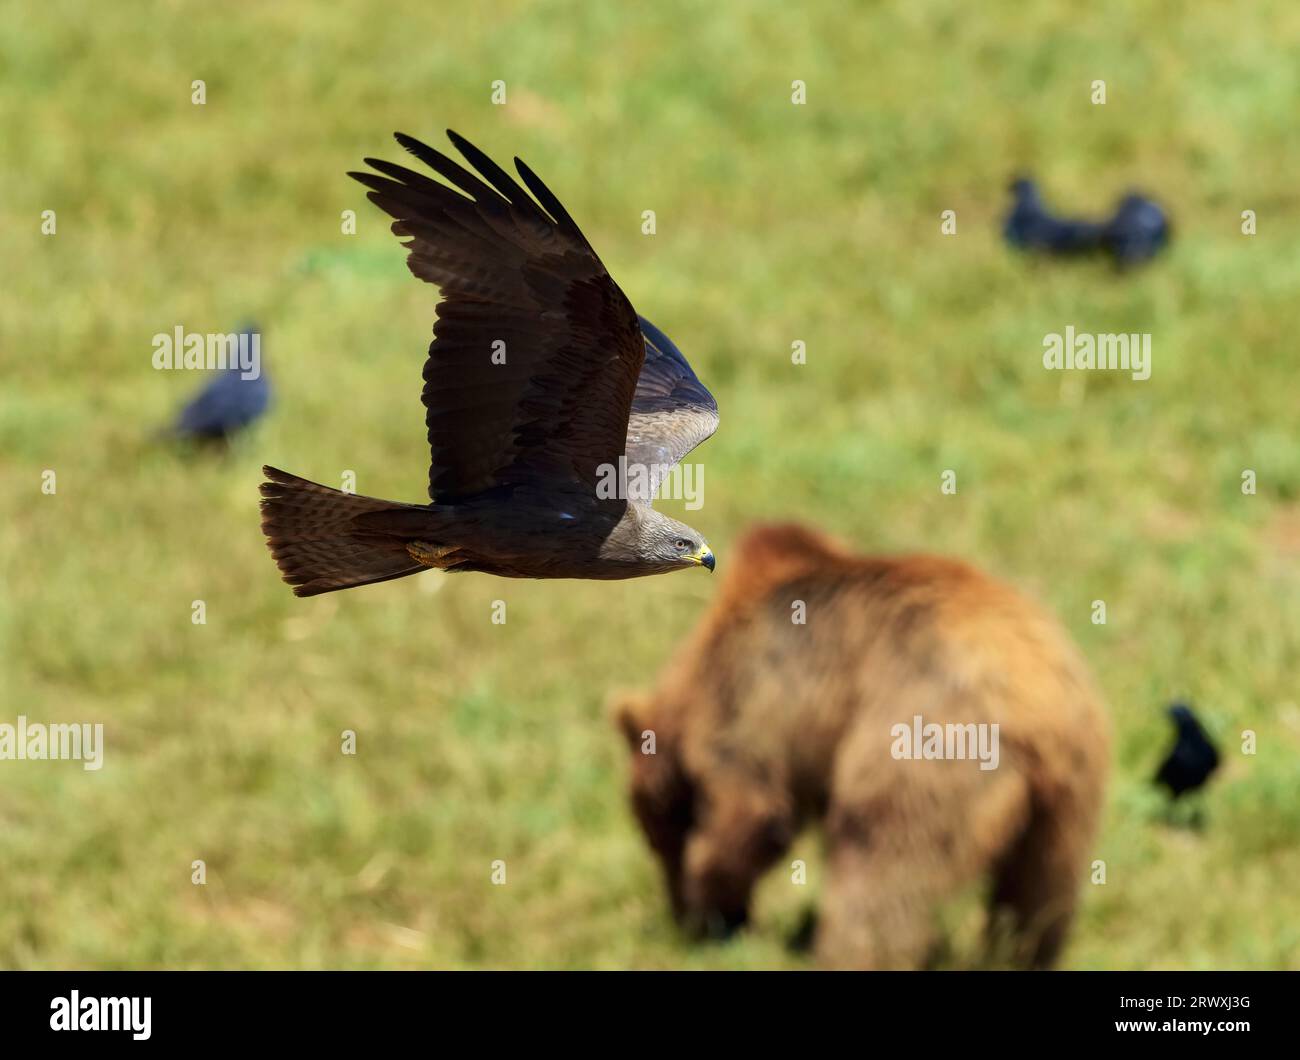 A close-up of a black kite flying, searching for food scraps in the bear enclosure of Cabarceno Natural Park. Milvus migrans. Stock Photo